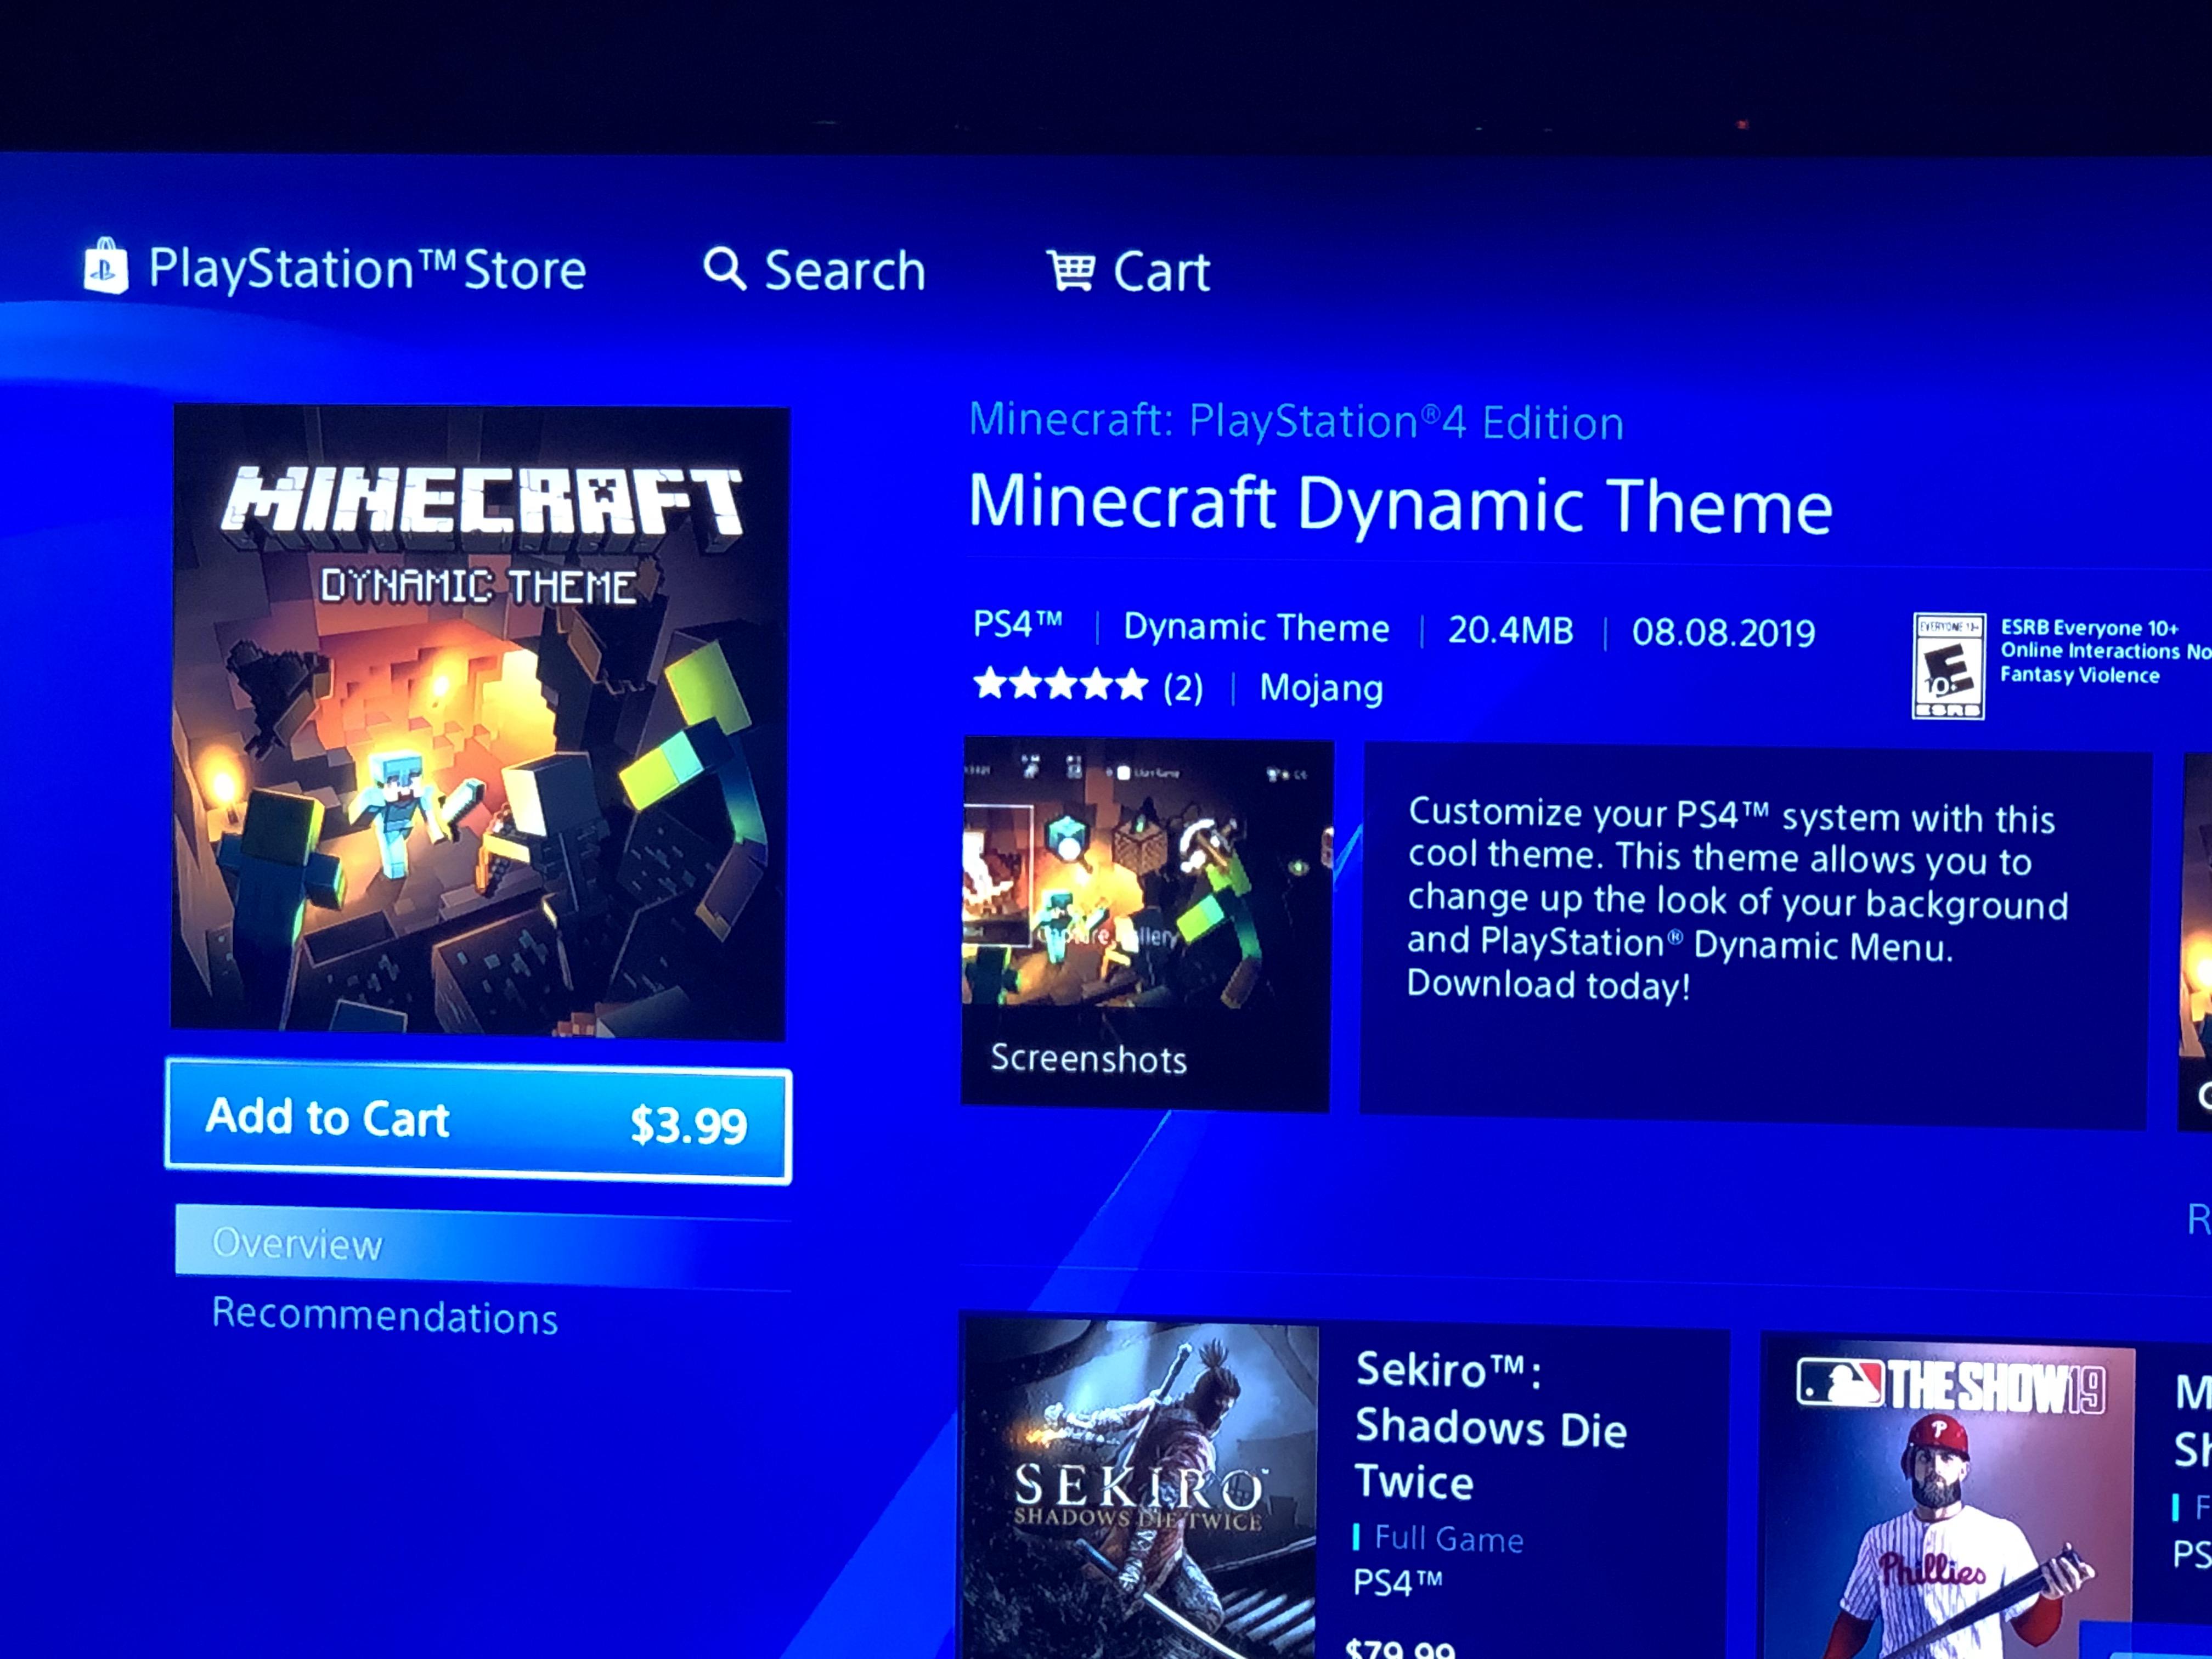 Hey Does Anyone Know If The Ps4 Dynamic Theme Of Minecraft Has